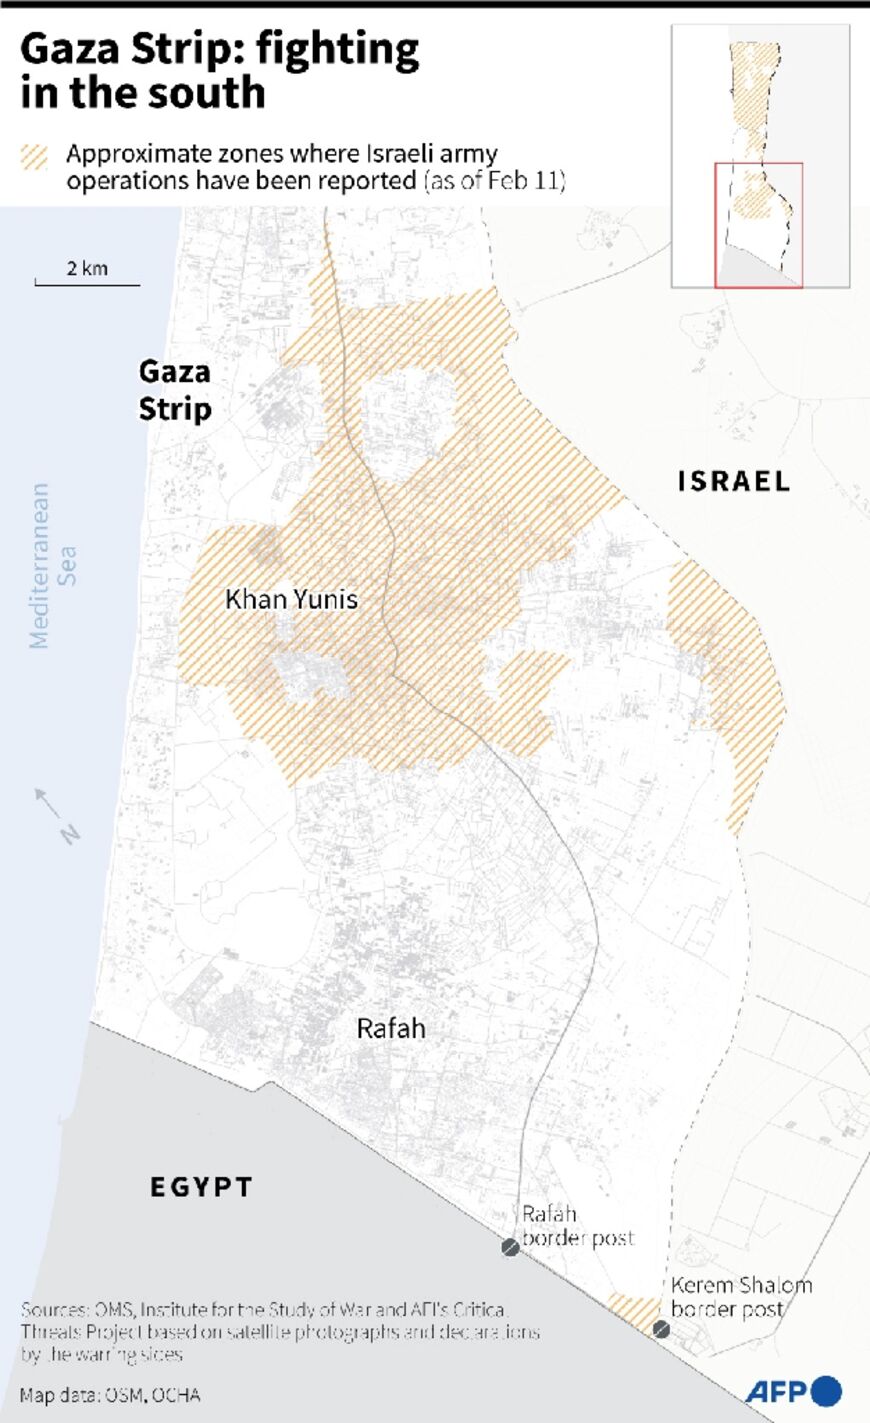 Gaza Strip: fighting in the south